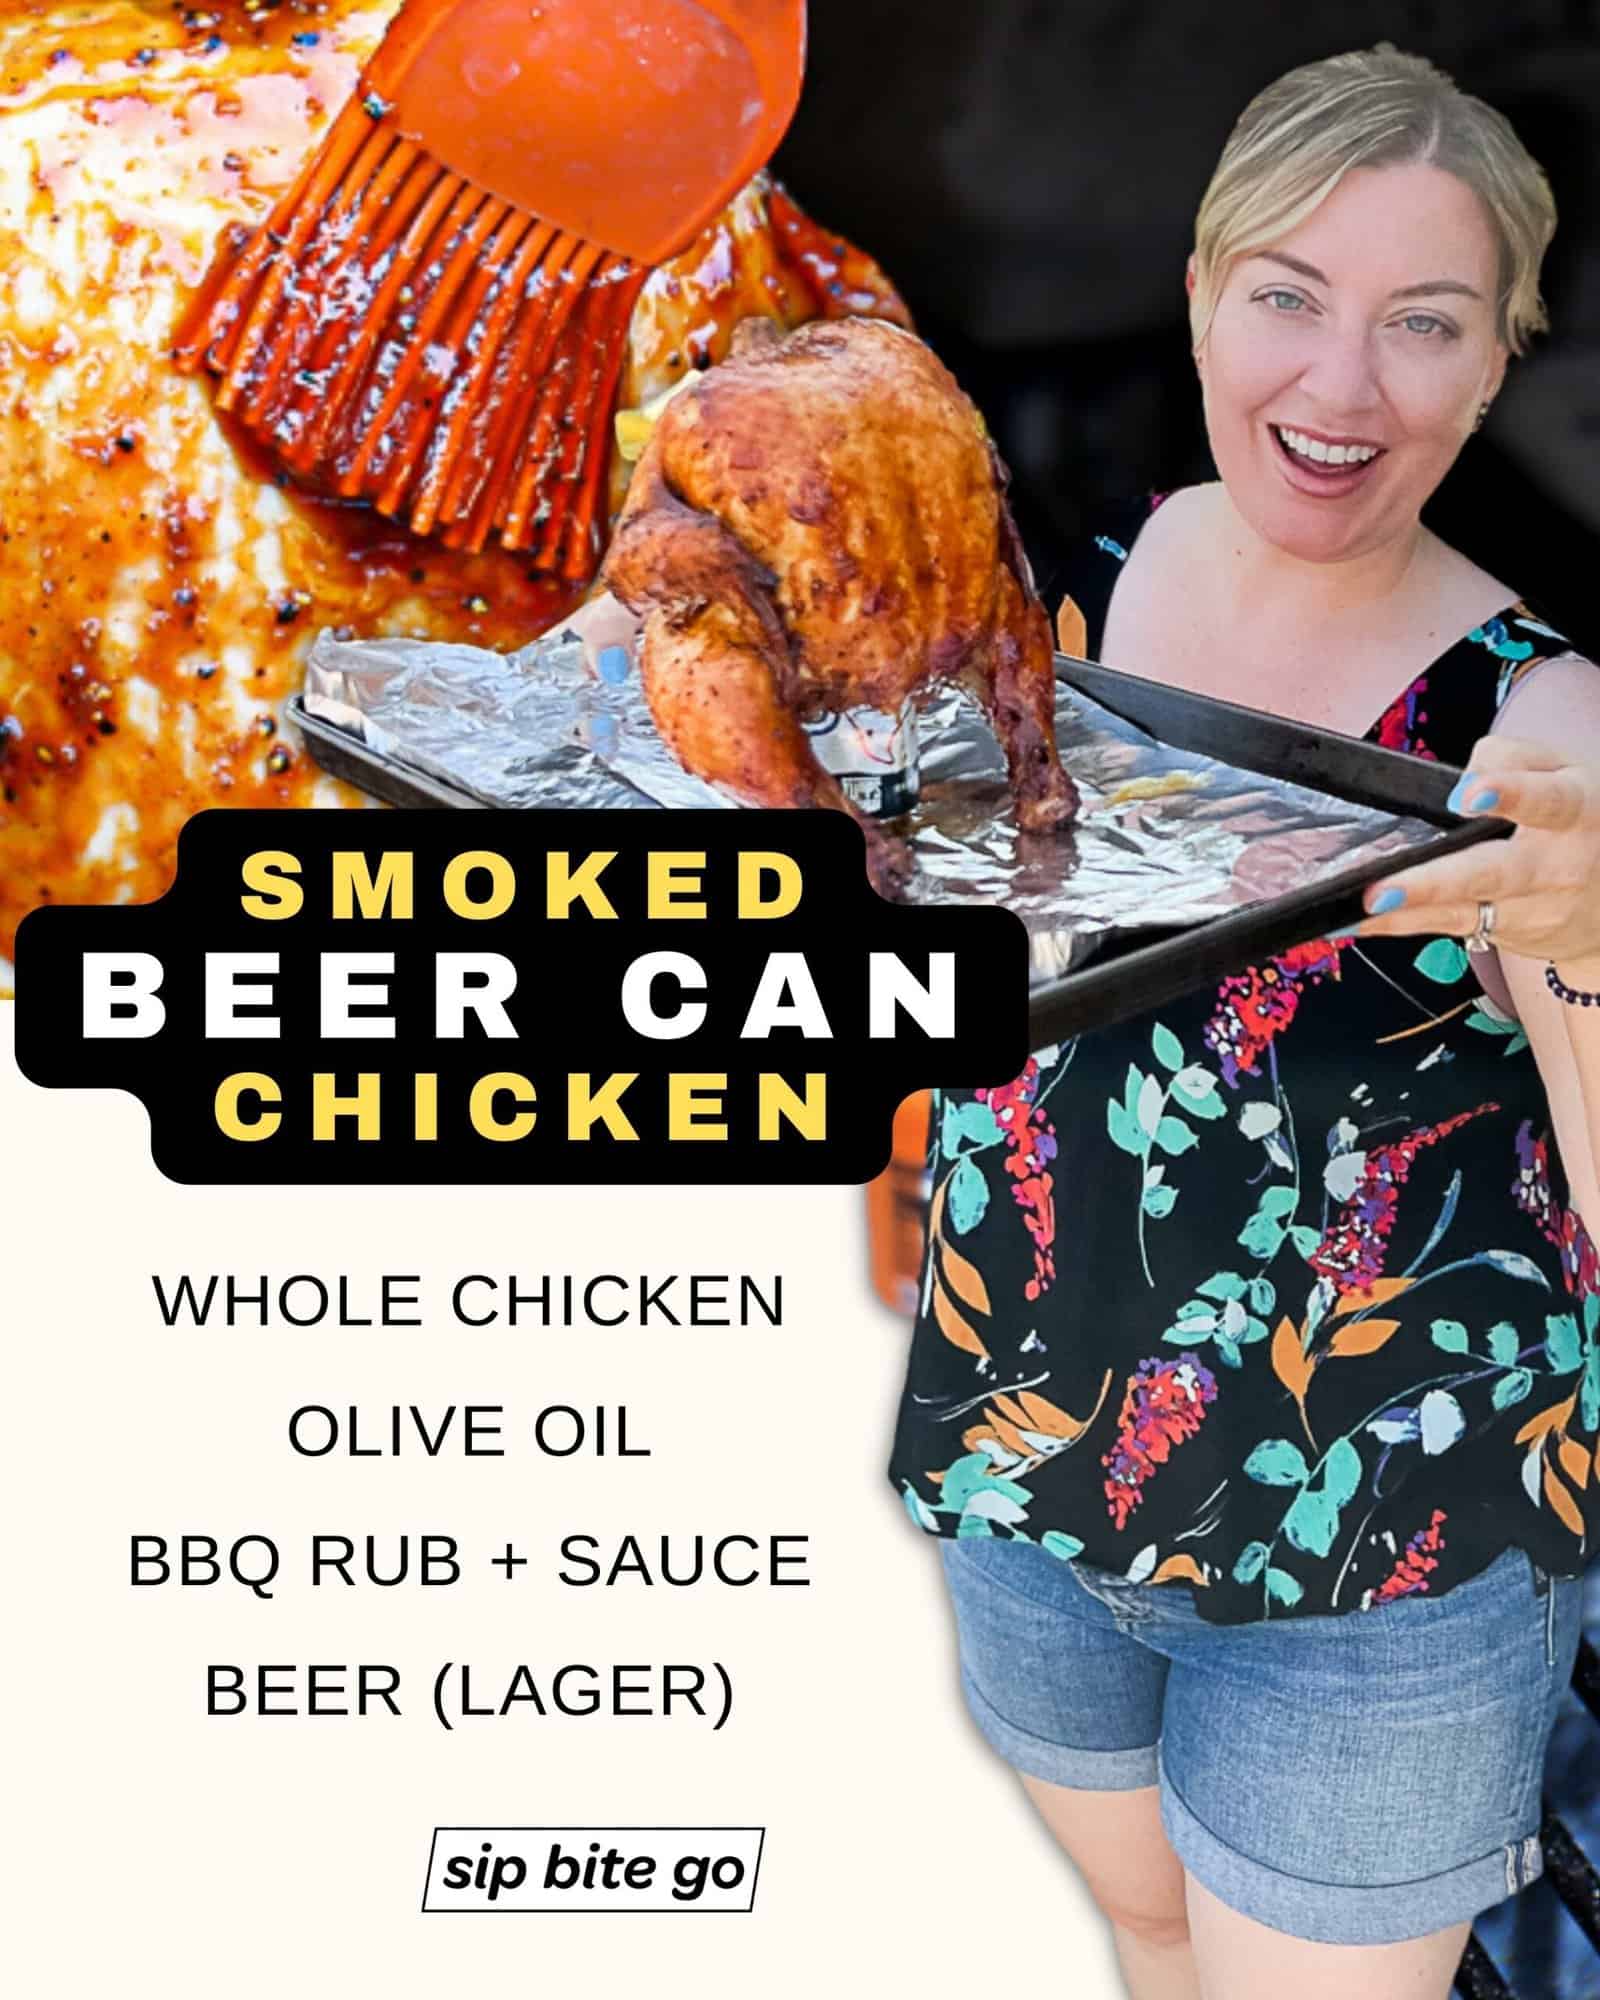 Infographic with recipe ingredient list for smoking beer can chicken on Traeger Pellet Grills